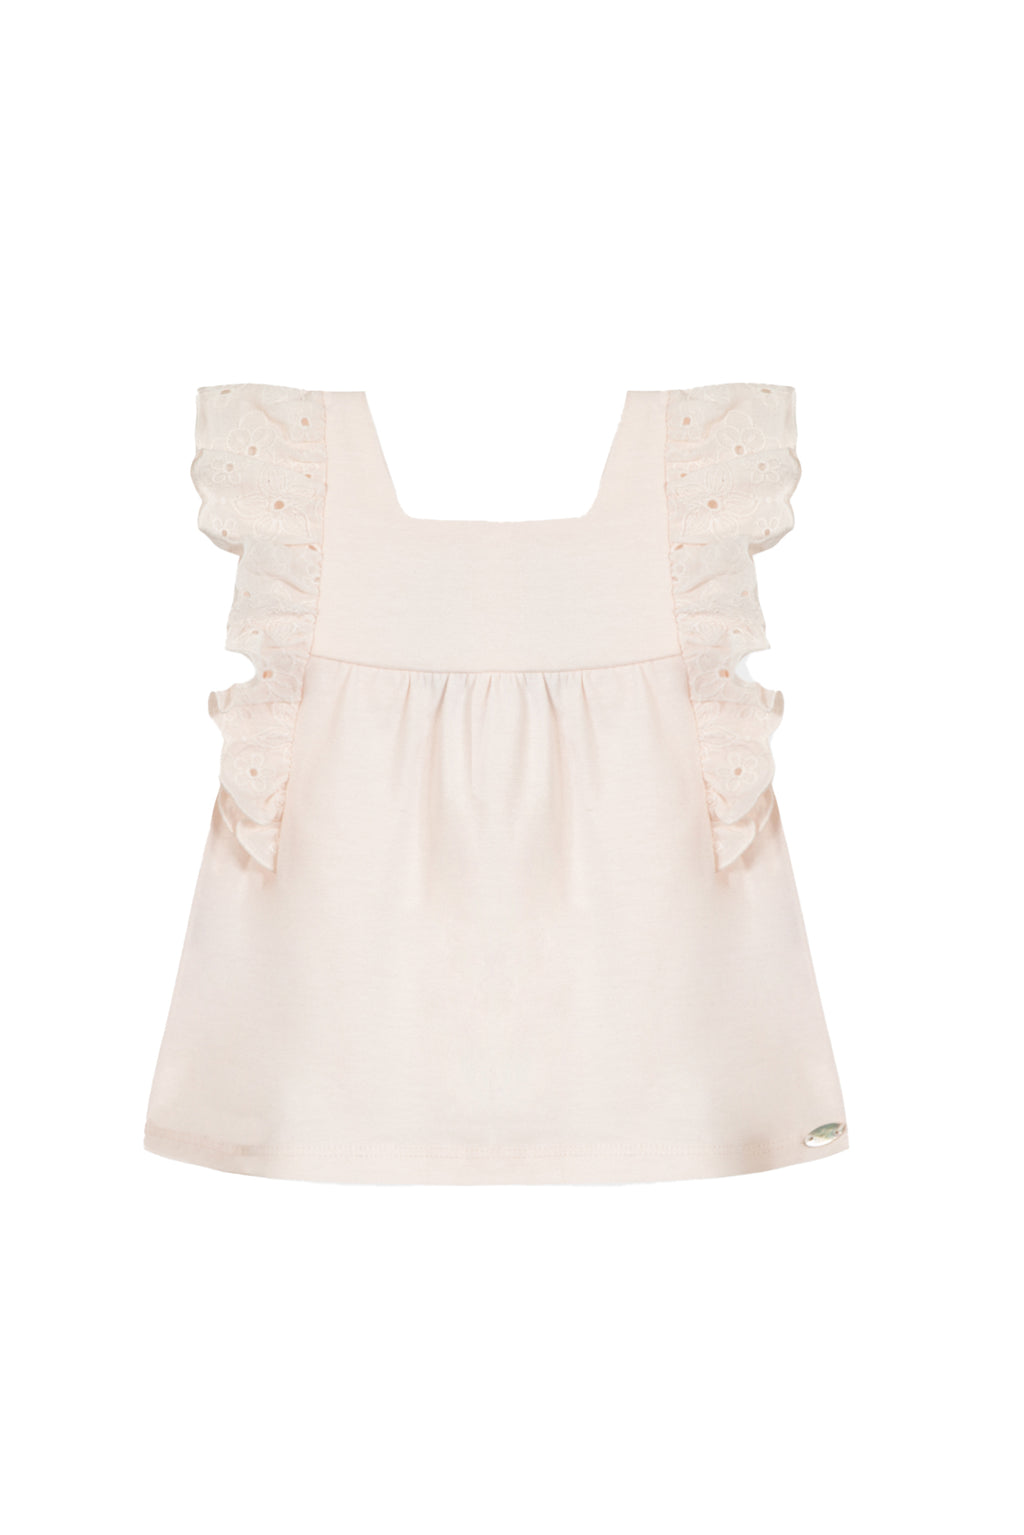 T-shirt - Rose pâle broderie anglaise